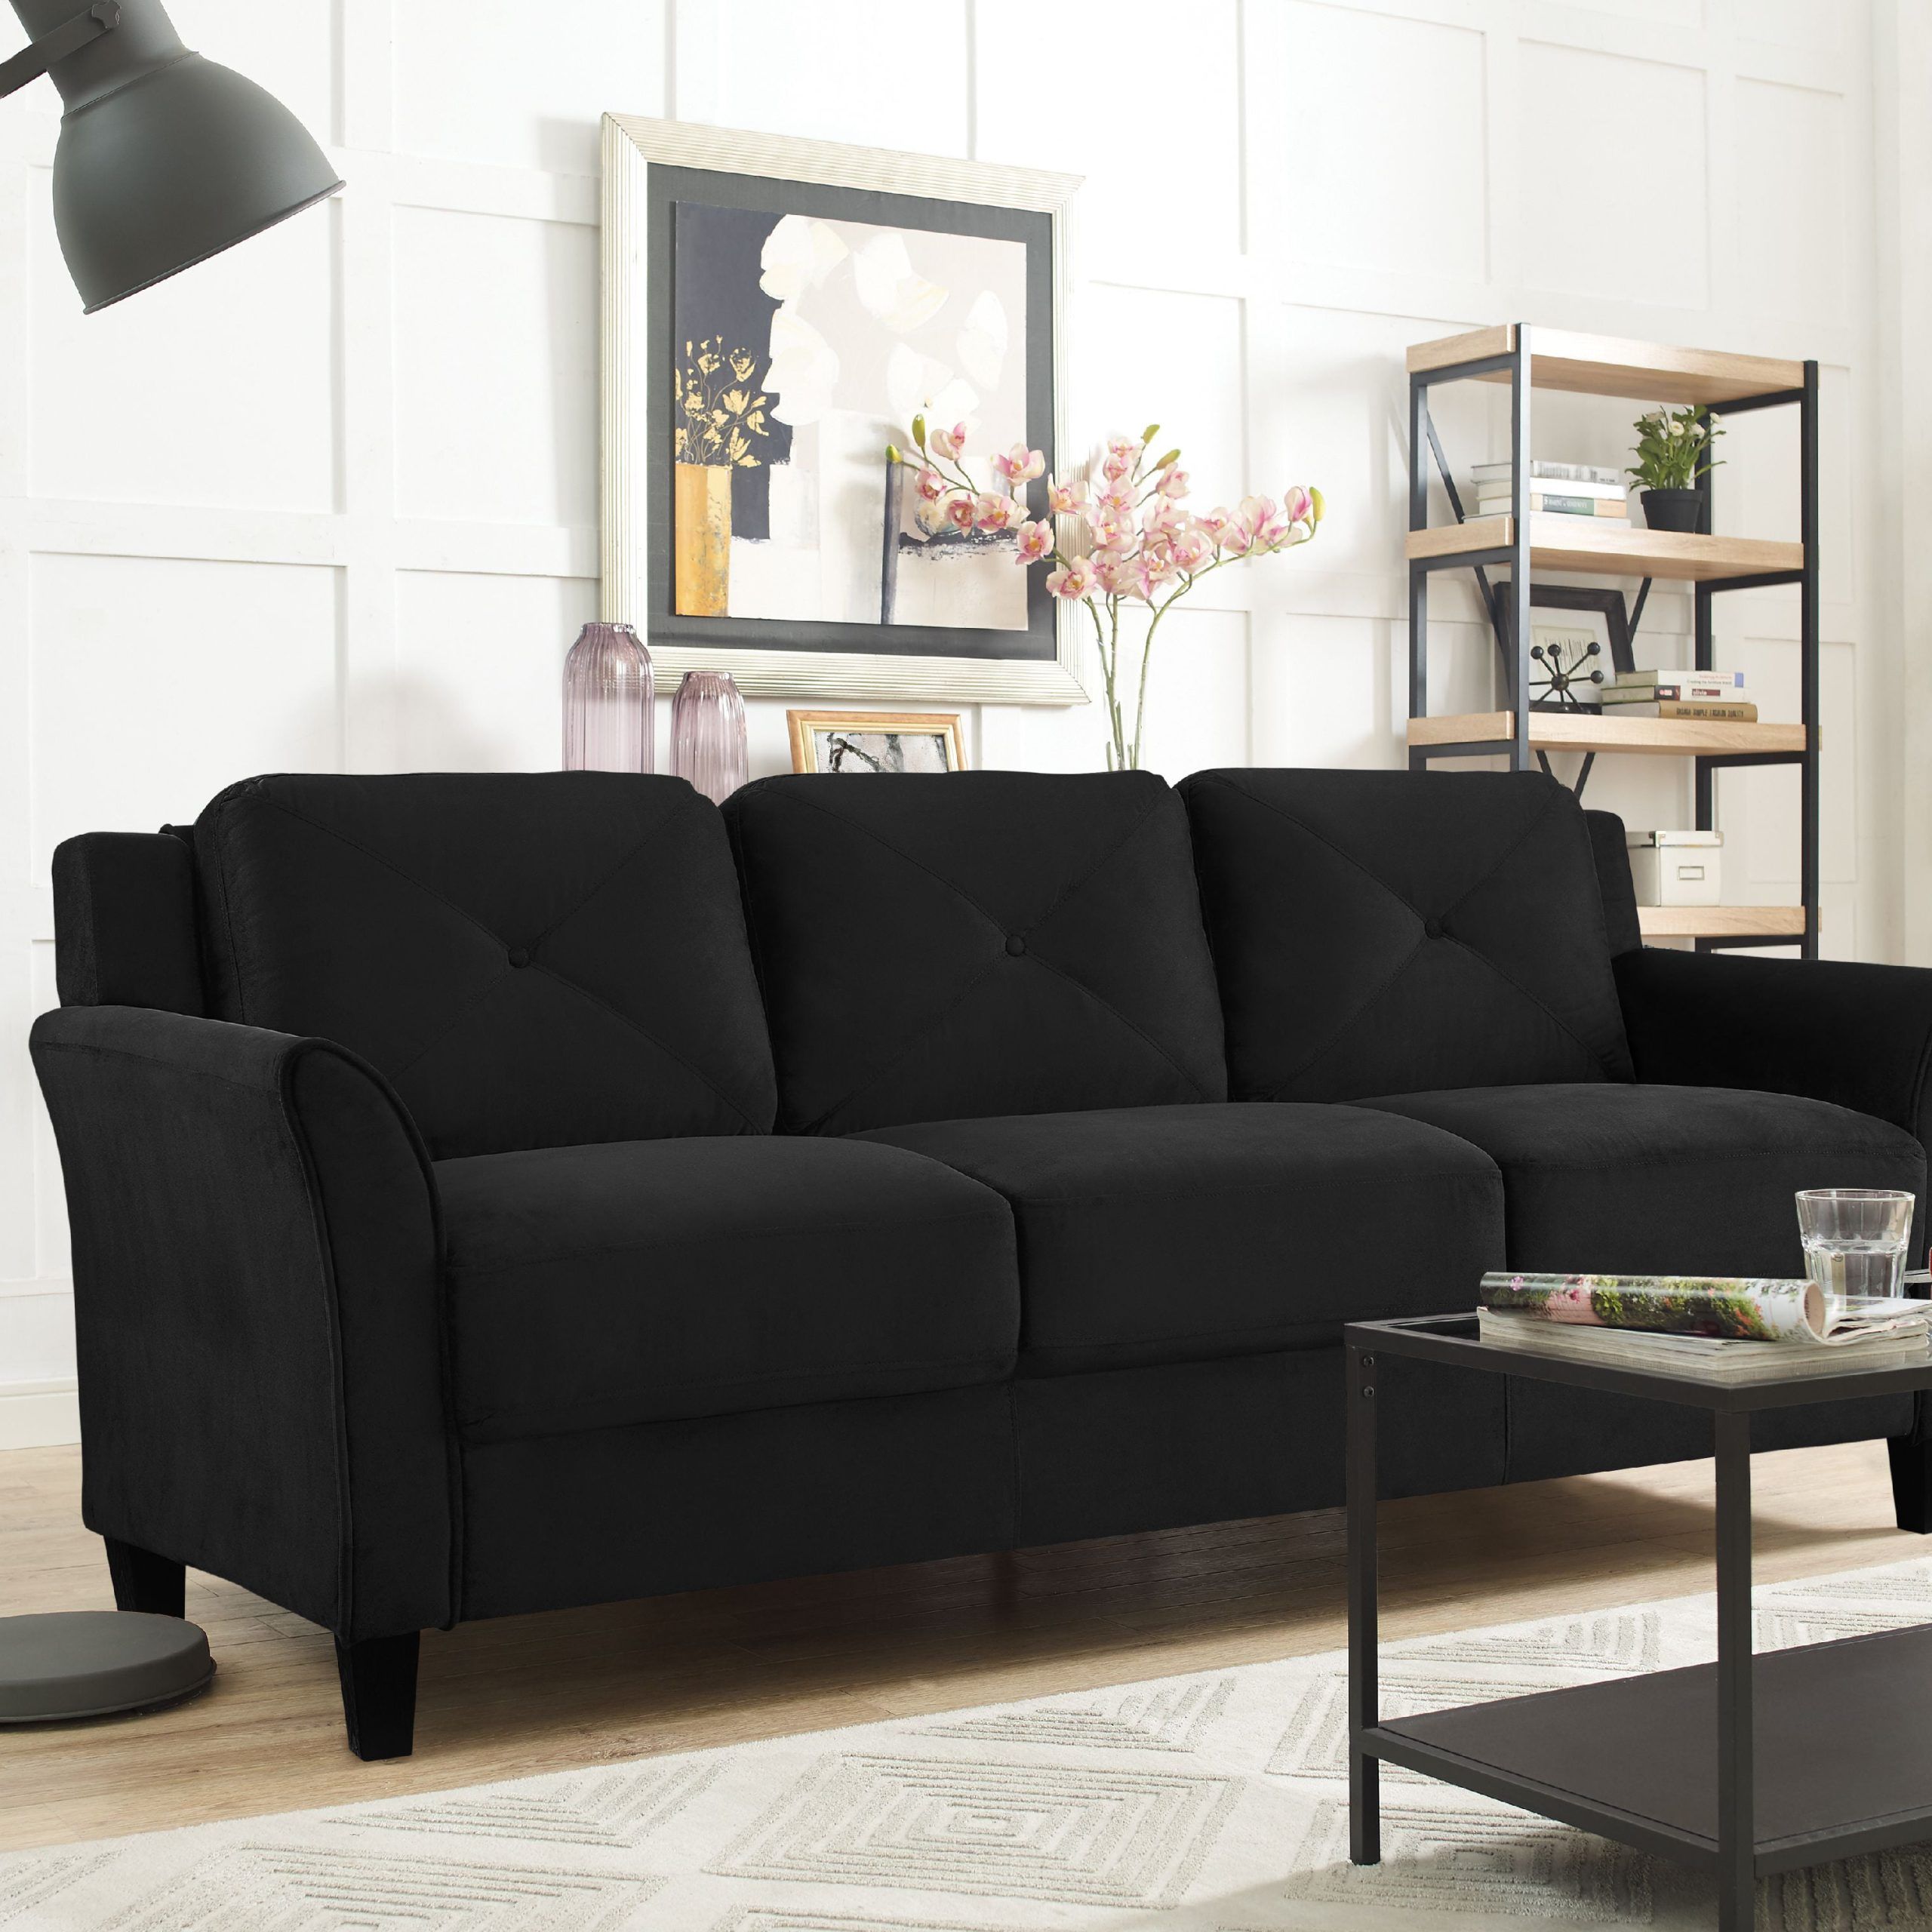 Lifestyle Solutions Taryn Curved Arm Fabric Sofa, Black – Walmart Throughout Right Facing Black Sofas (View 14 of 20)